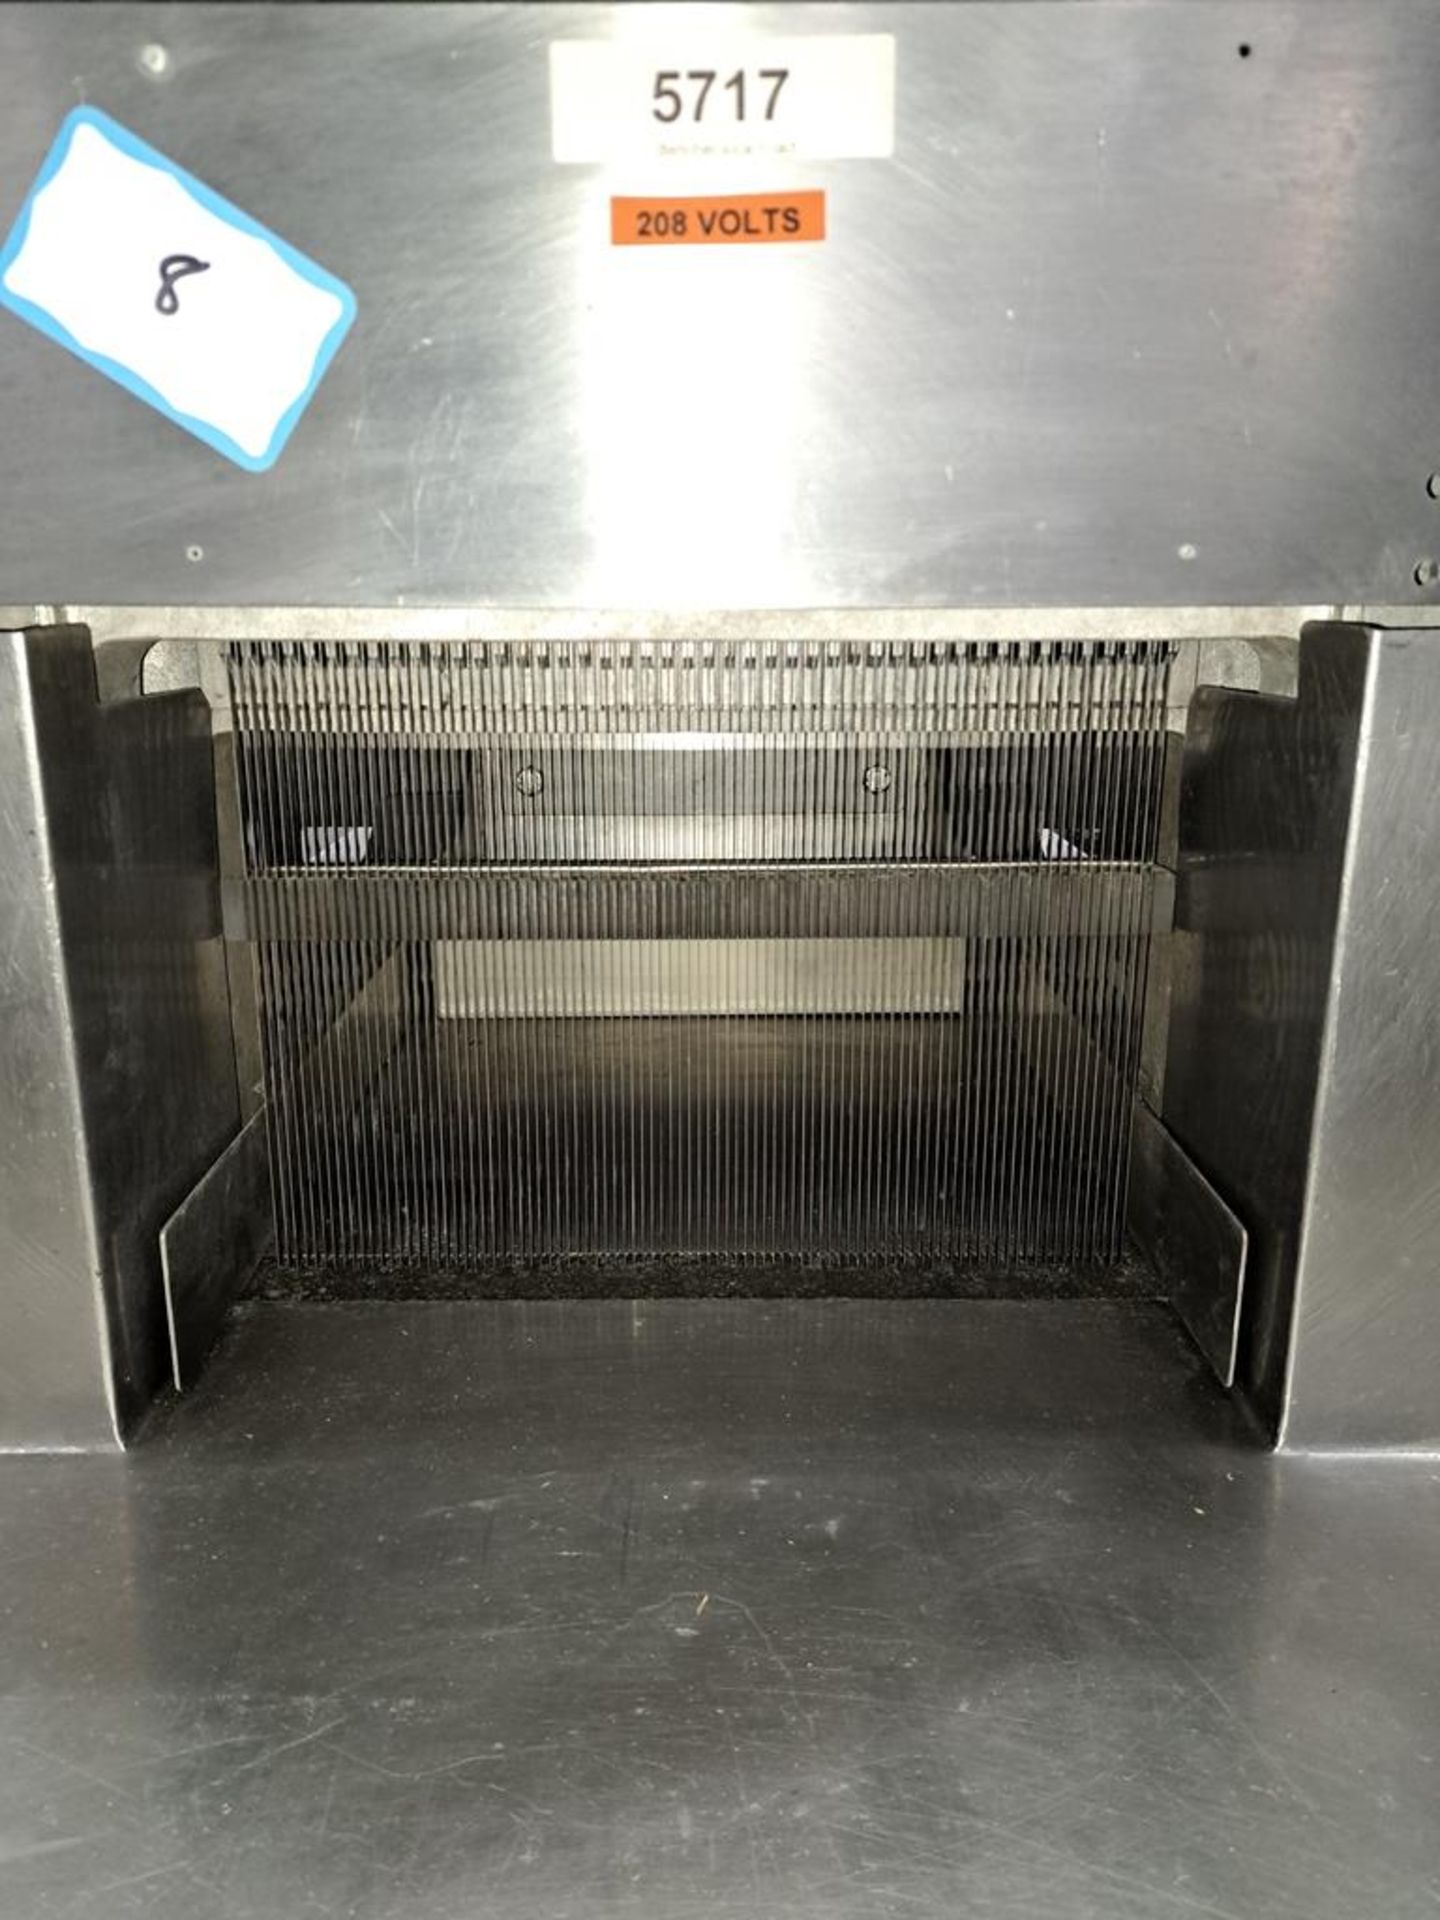 Bettcher Mdl. BH15 Slice-N-Tact Reciprocating Blade Slicer, .15" wide cutting harp, 208 volts, 3 - Image 3 of 14